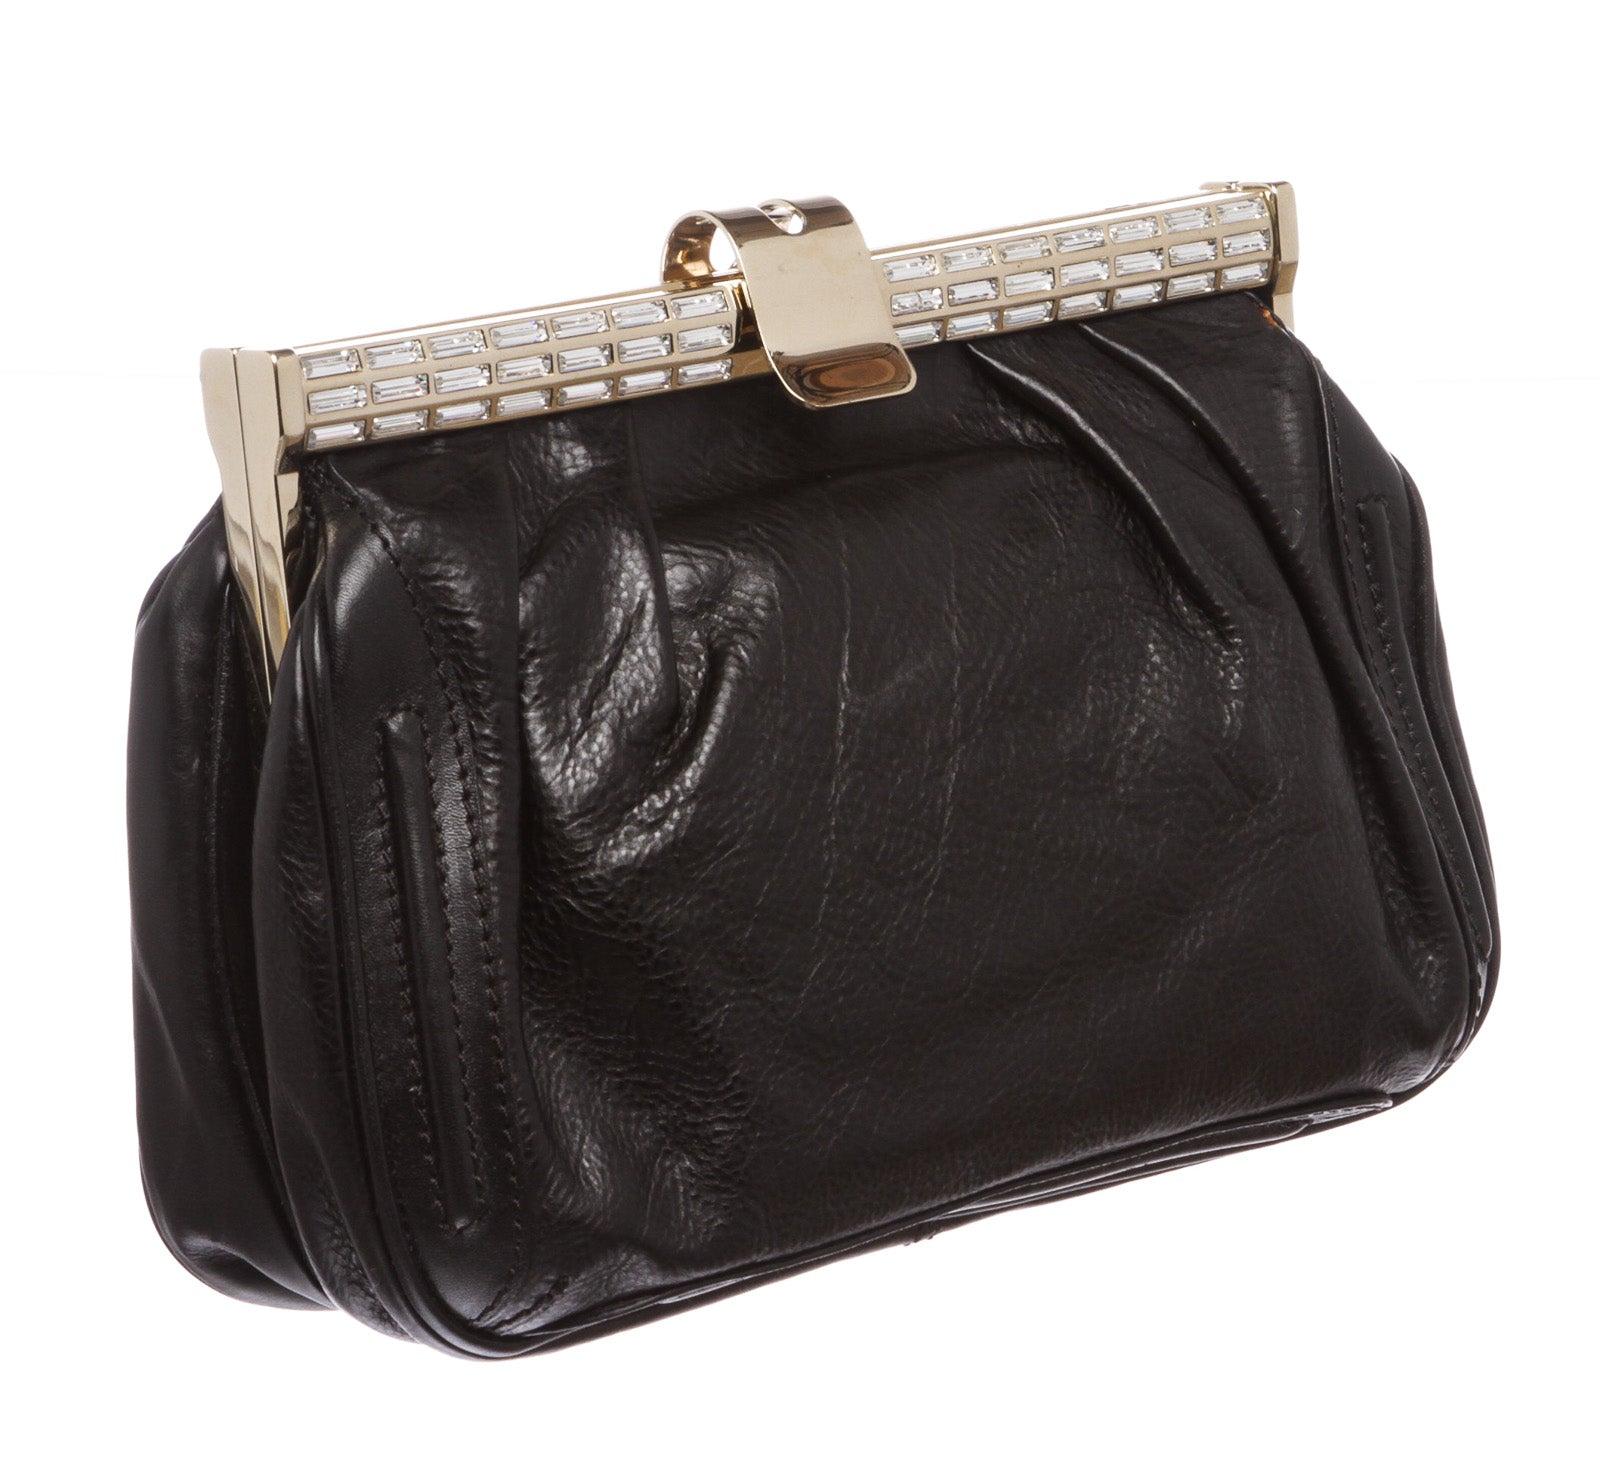 Black leather MCM clutch with gold-tone hardware and small crystal embellishments at top. Interior contains black satin lining with one slip pocket and one zipper pocket at interior wall and push-lock closure at top. Includes removable chain